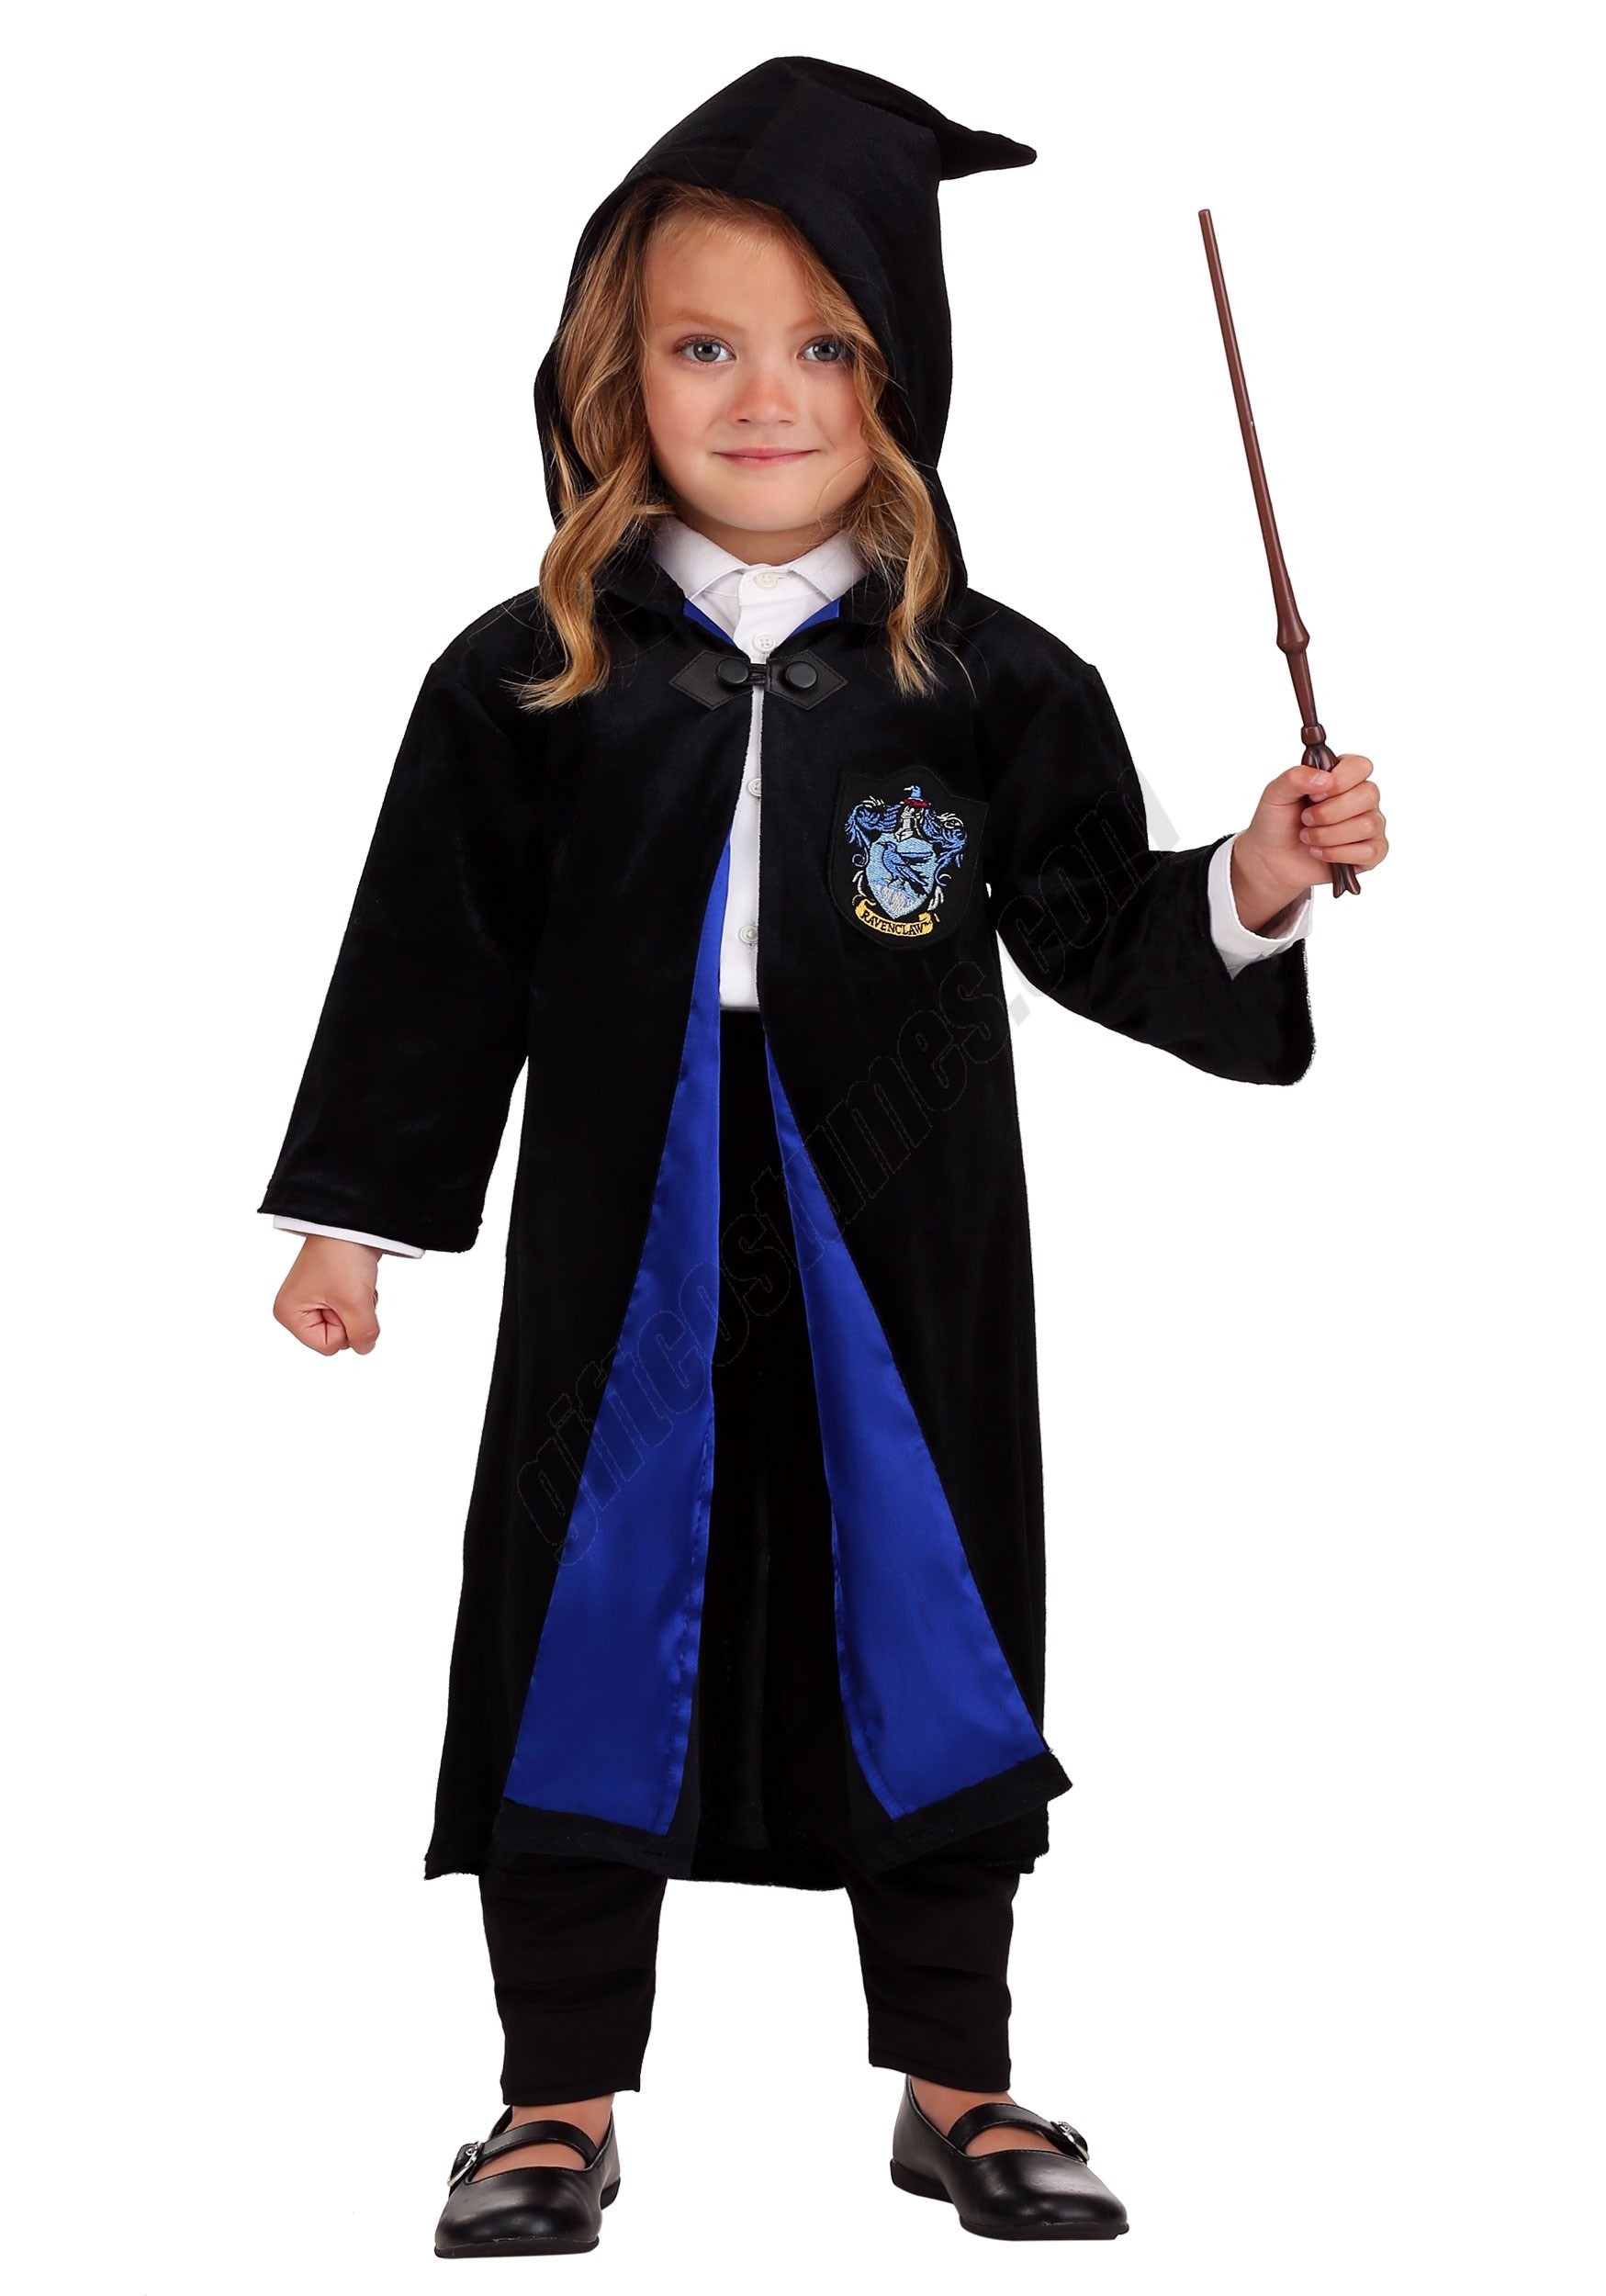 Harry Potter Kids Deluxe Ravenclaw Robe Costume Promotions - Harry Potter Kids Deluxe Ravenclaw Robe Costume Promotions